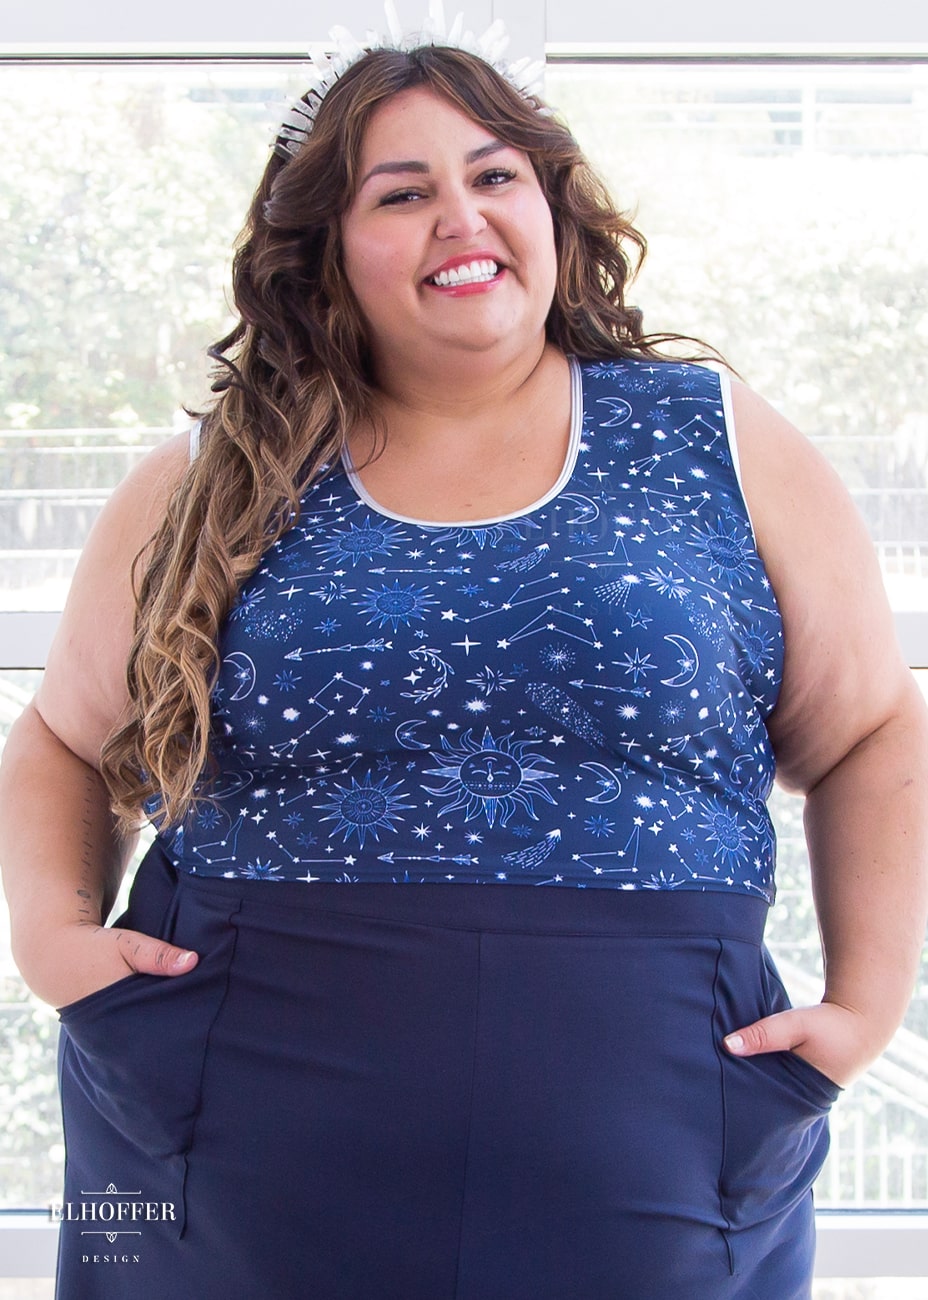 Kristen, a size 3XL olive skinned model with long highlighted brown hair, is wearing a low scoop neckline sleeveless crop top with silver metallic foldover binding at the neck and armholes, wide shoulder straps, fitted throughout the body, and ending at the natural waist in our star crossed lovers print. The Star-Crossed Lovers print is a celestial inspired pattern featuring a navy base and white stars, constellations, sunds, moons, and other small details scattered across the repeated art.